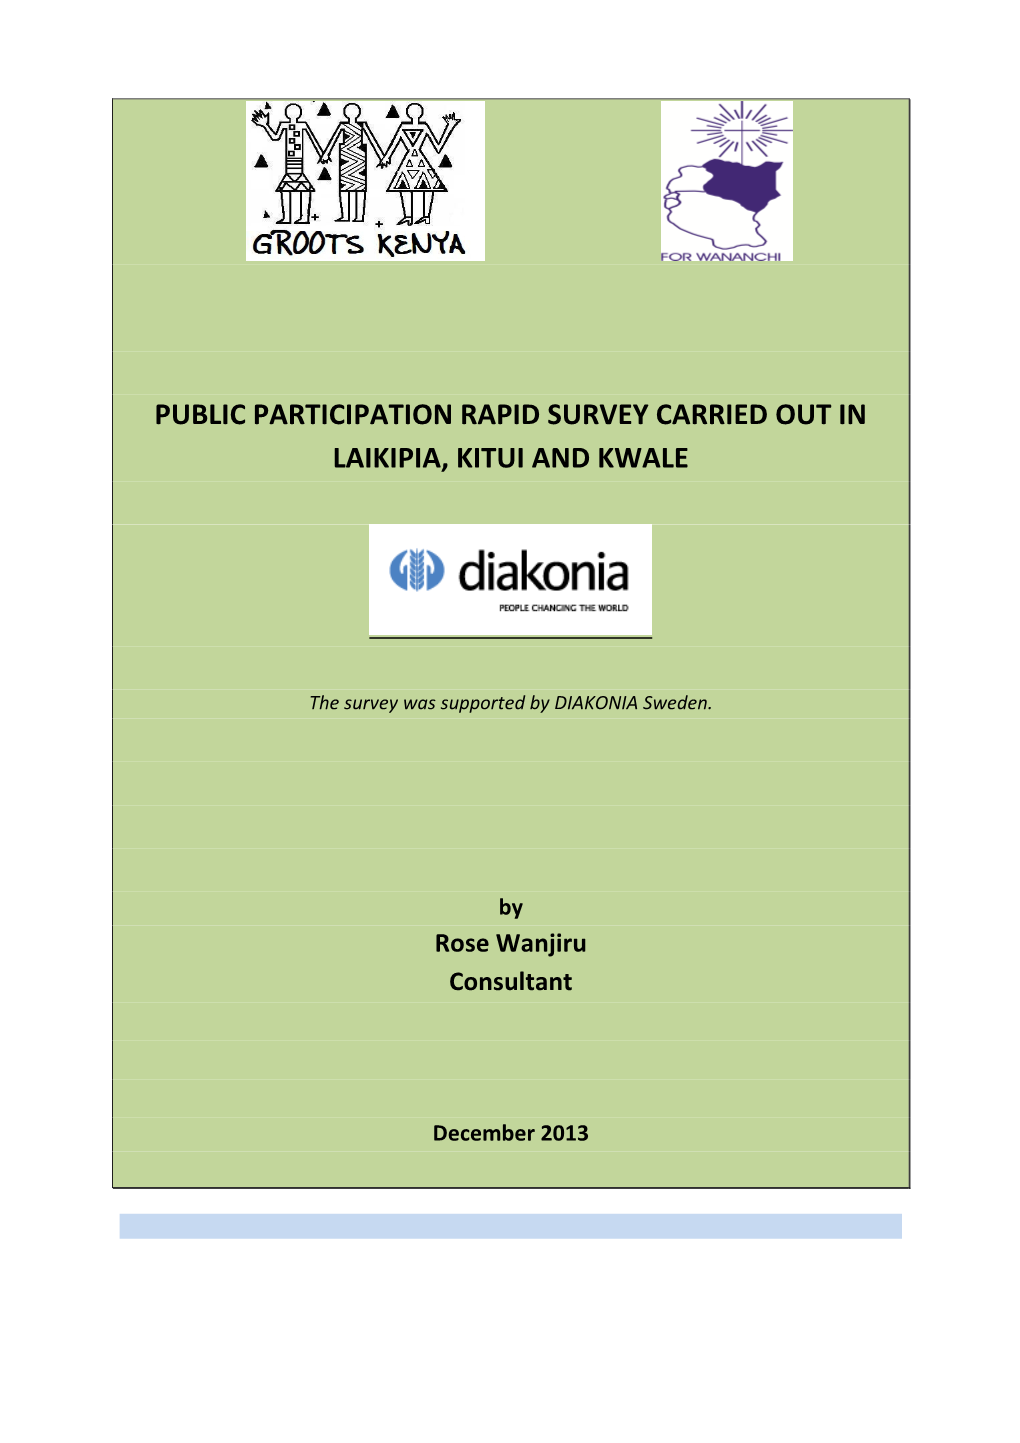 Public Participation Rapid Survey Carried out in Laikipia, Kitui and Kwale